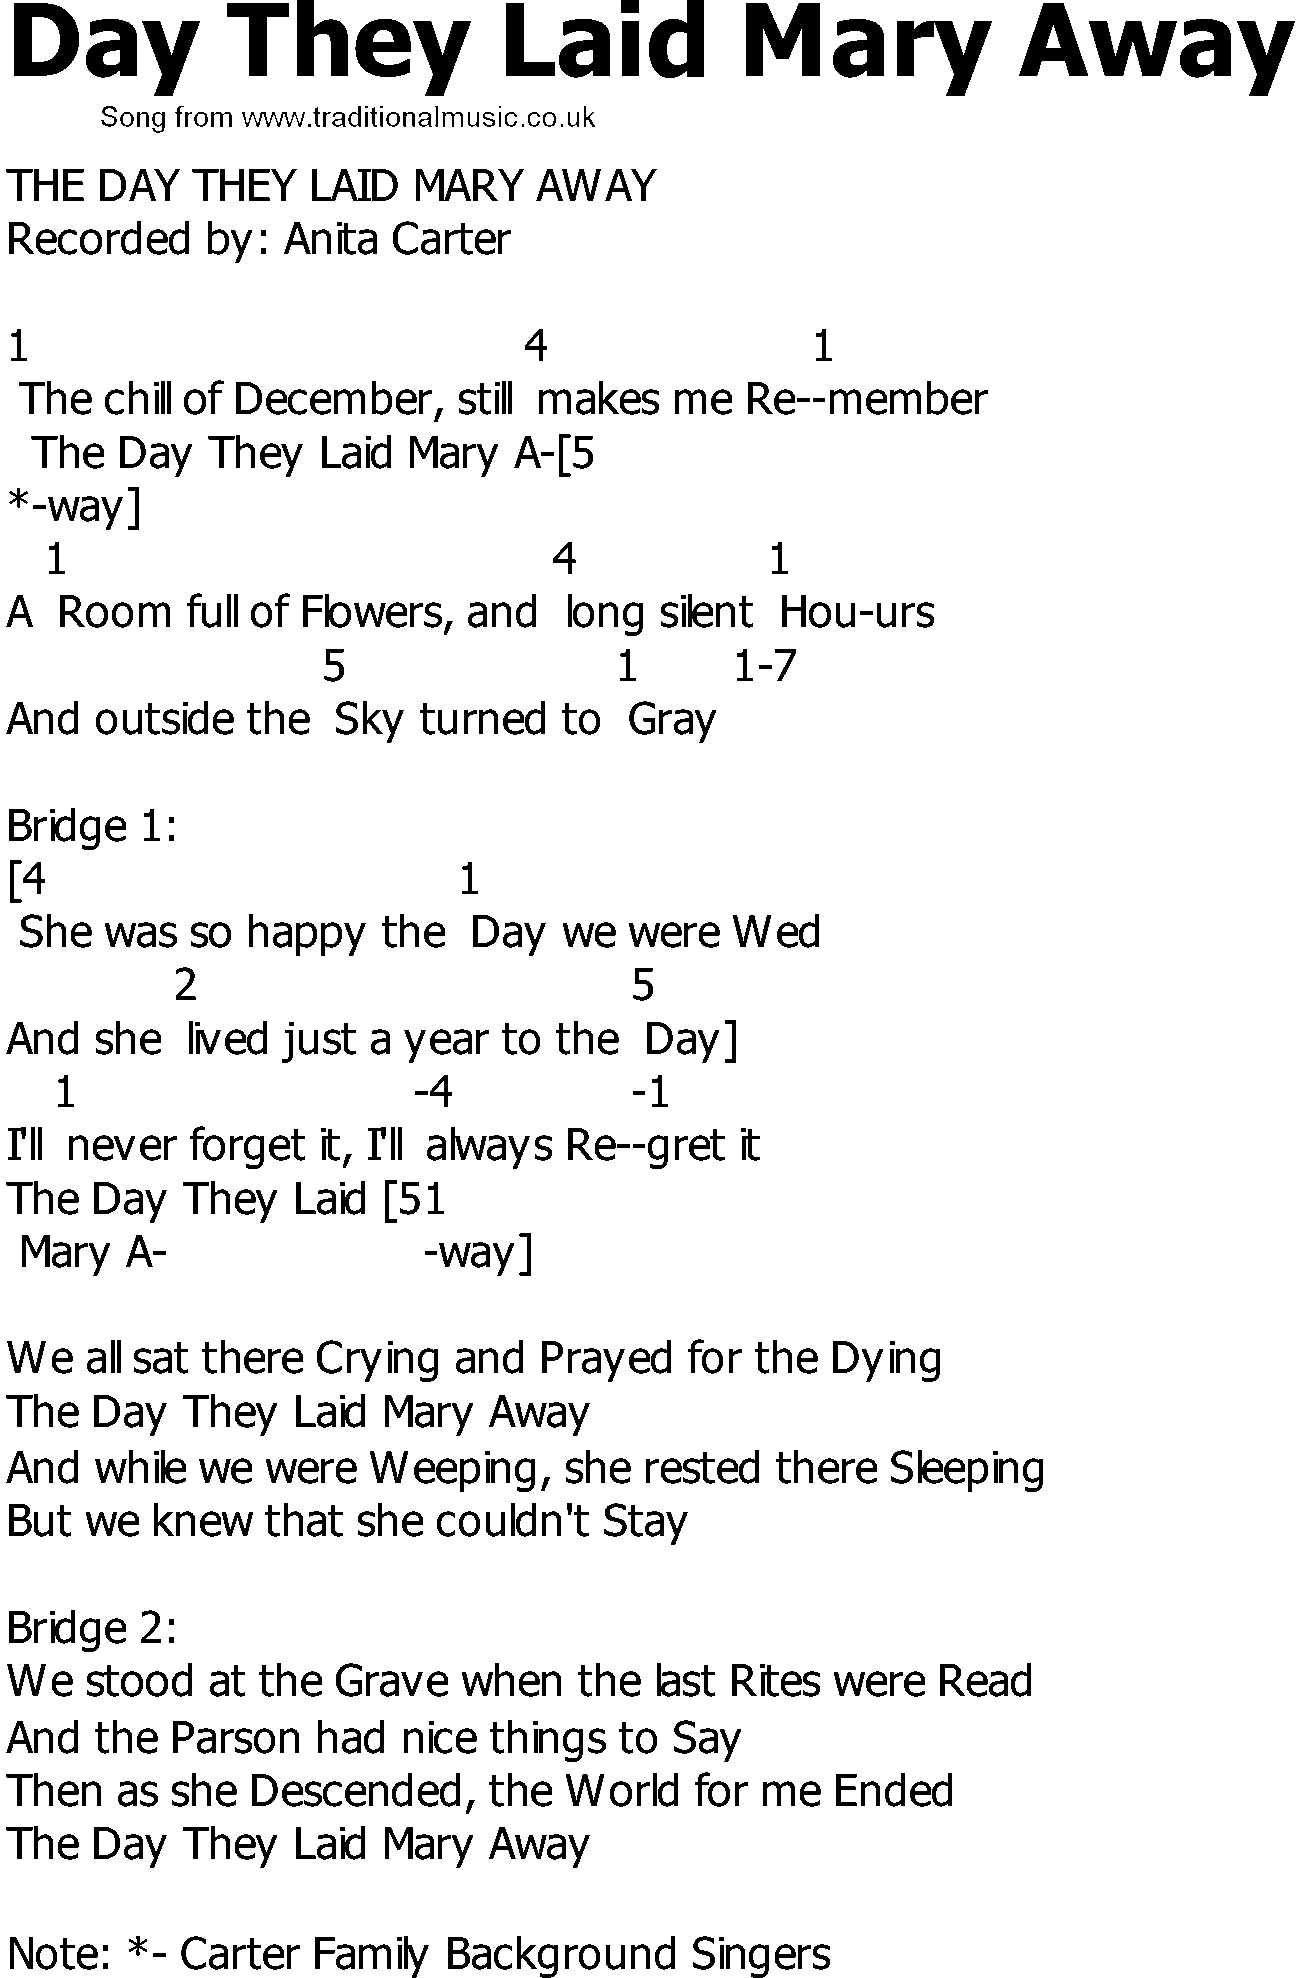 Old Country song lyrics with chords - Day They Laid Mary Away